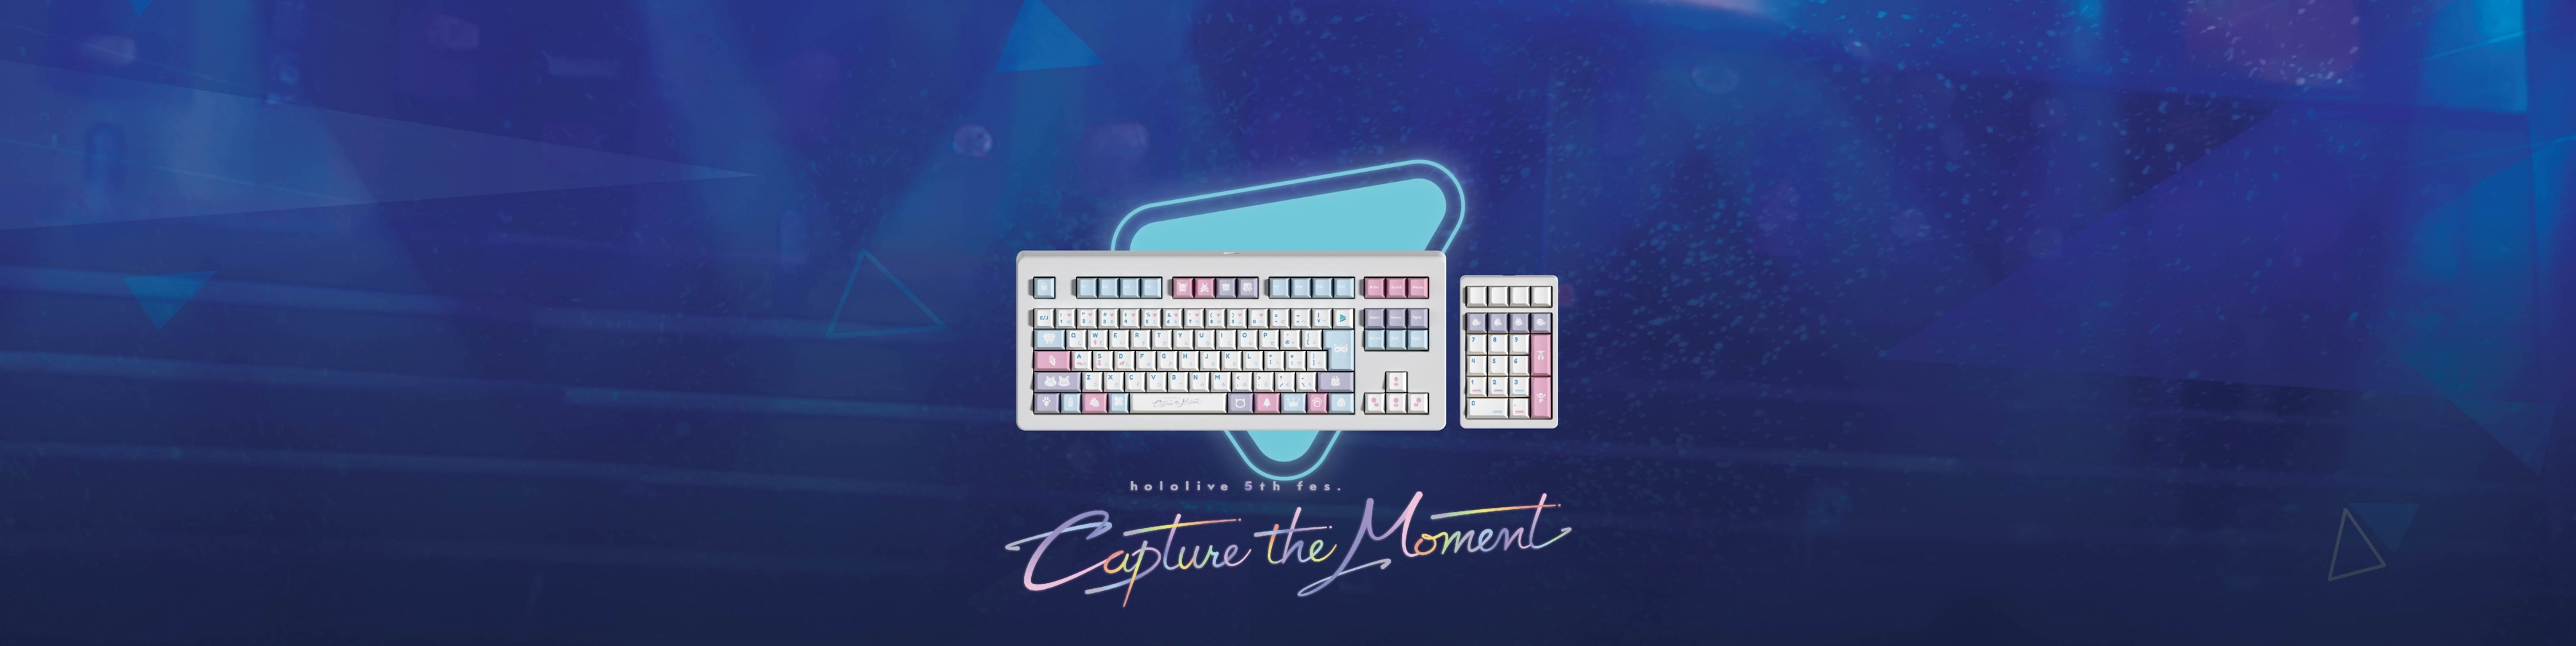 hololive GAMERS Capture the Moment Keycaps